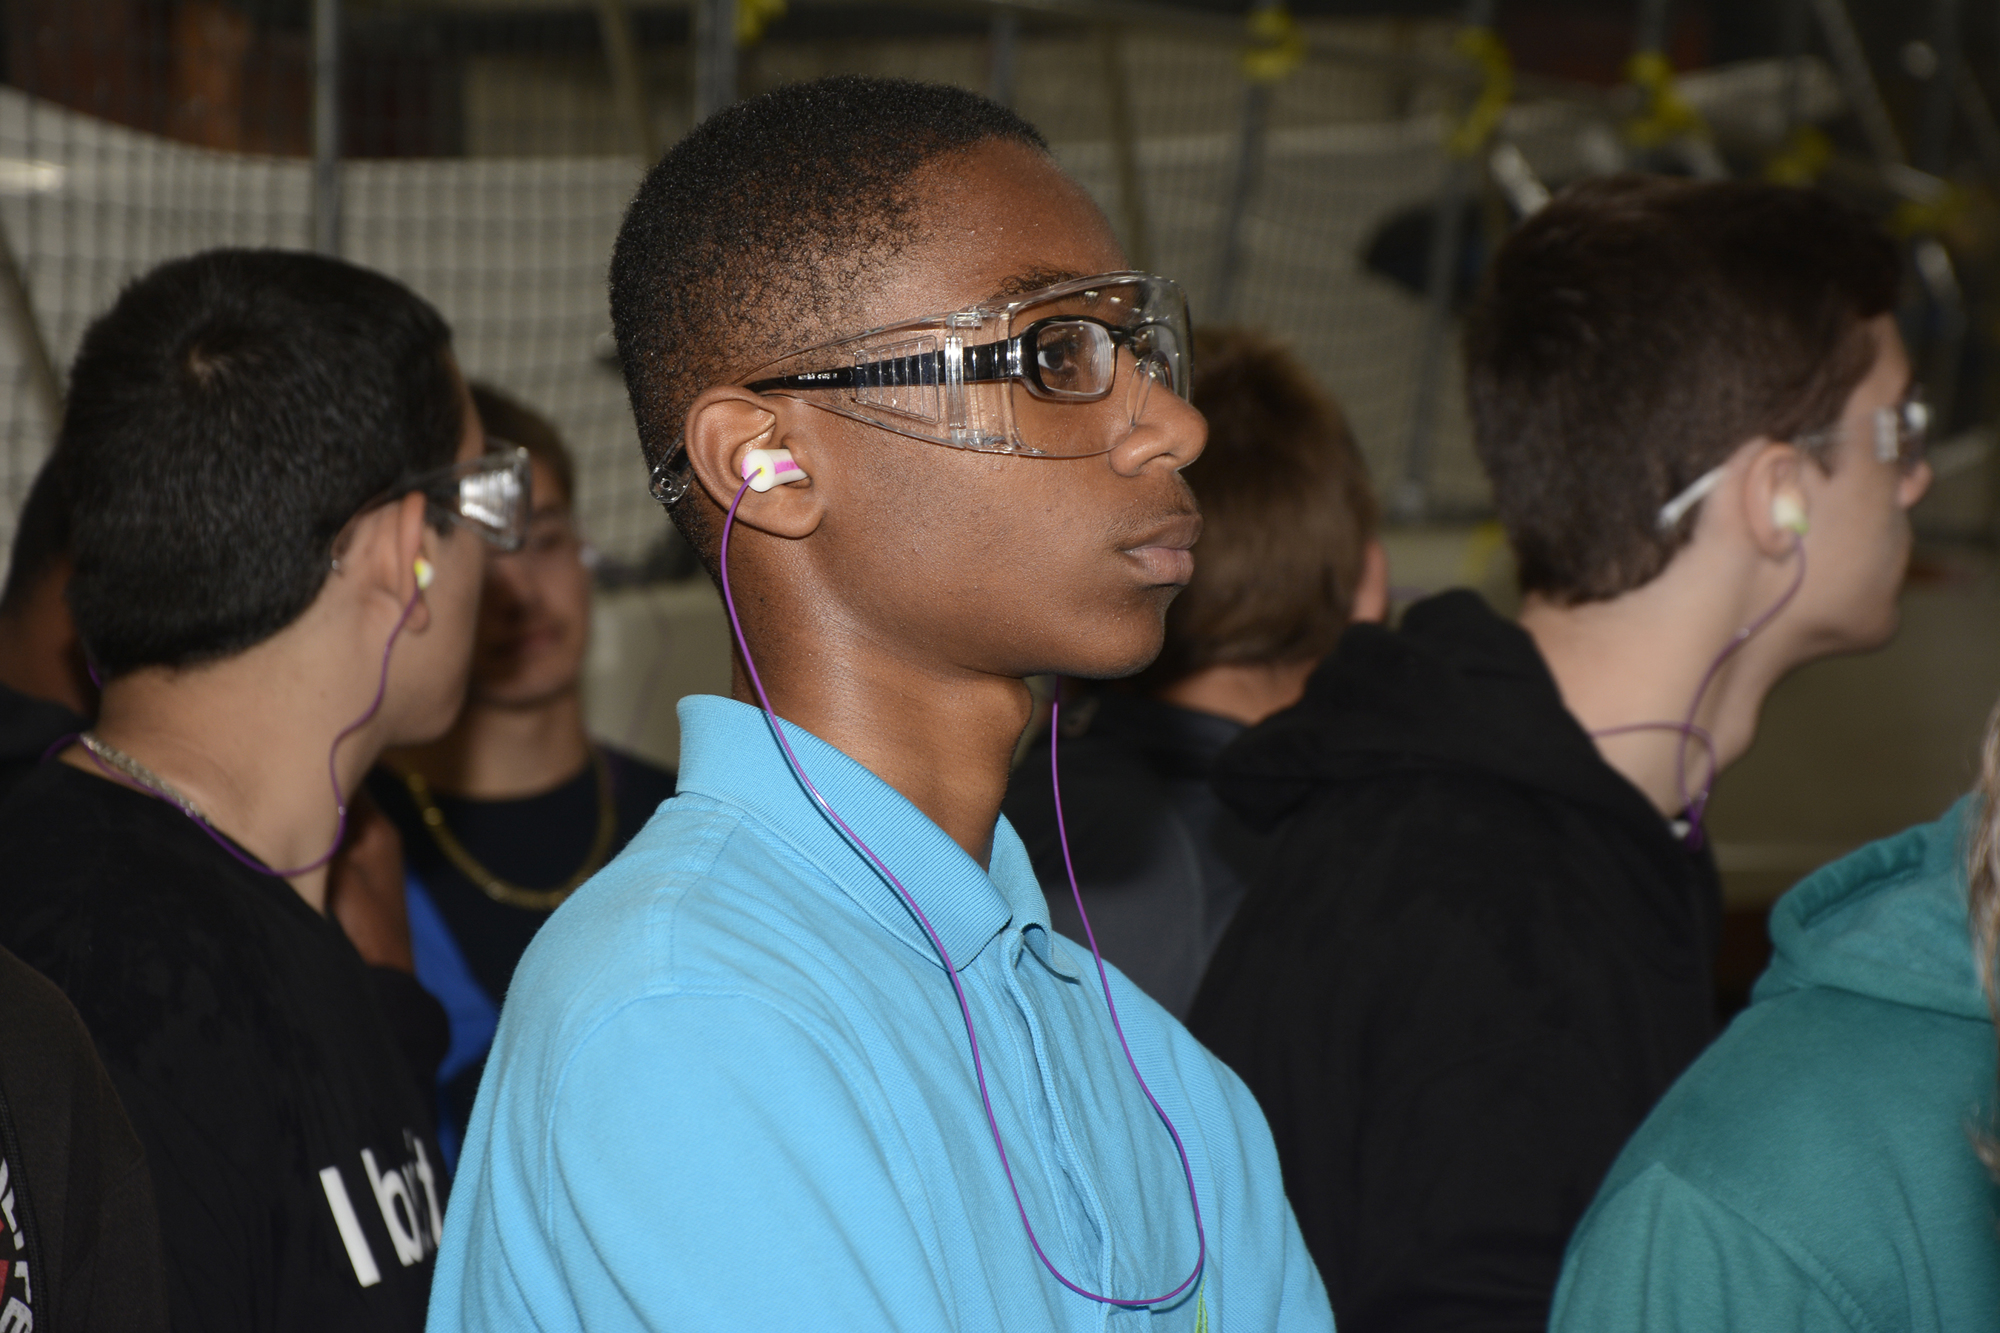 Lavadus Davis, a freshman of FPC, listens intently to SeaRay tour guide Chris Lamb, as he explains the inner-workings of the manufacturing facility.